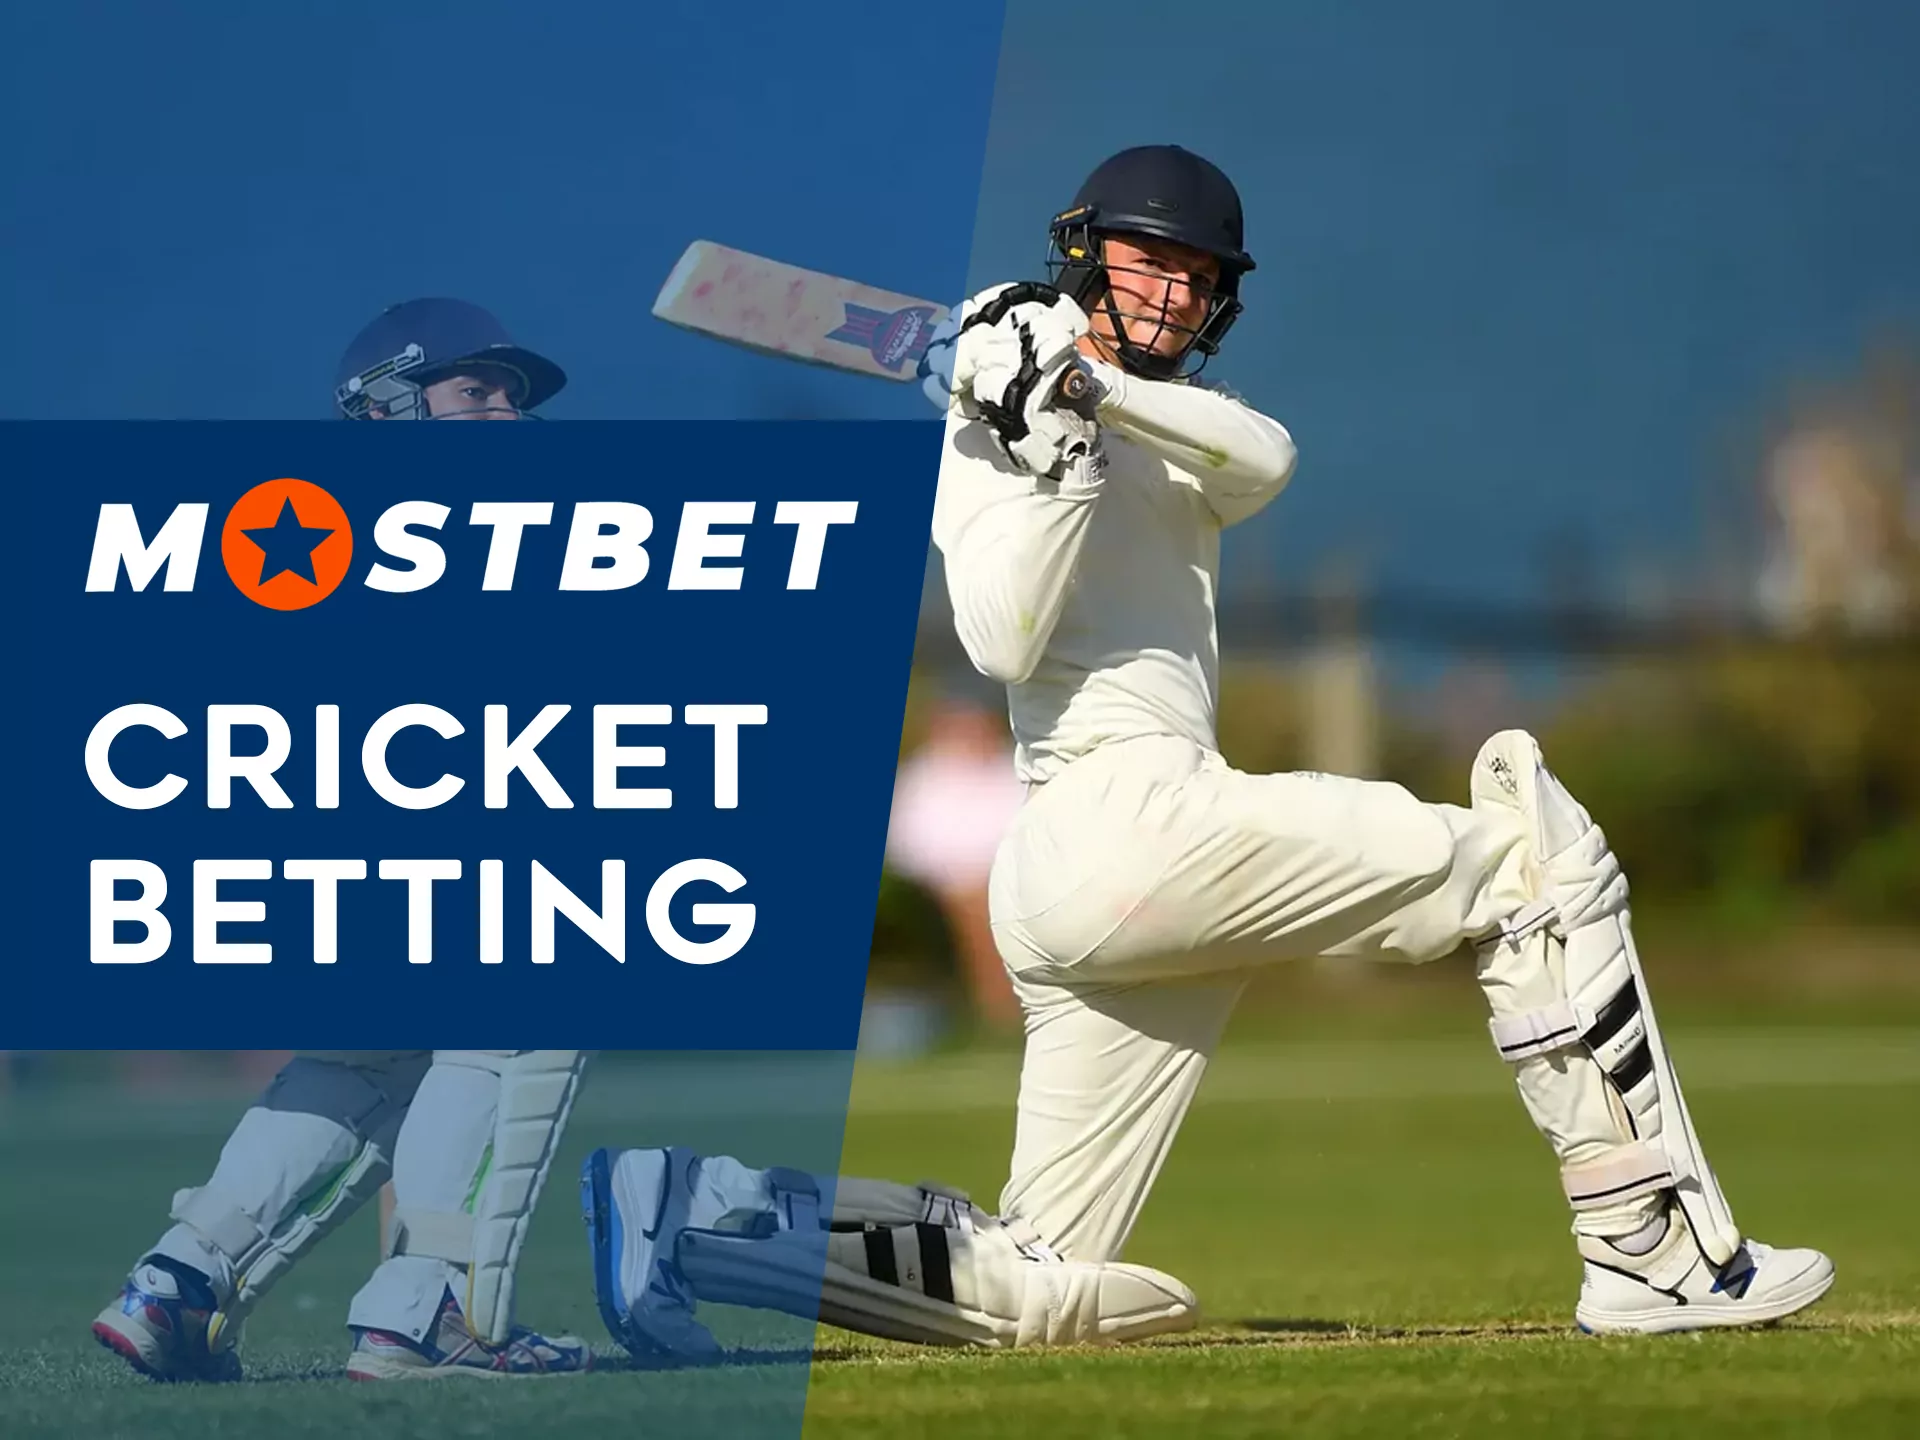 Cricket betting at Mostbet.